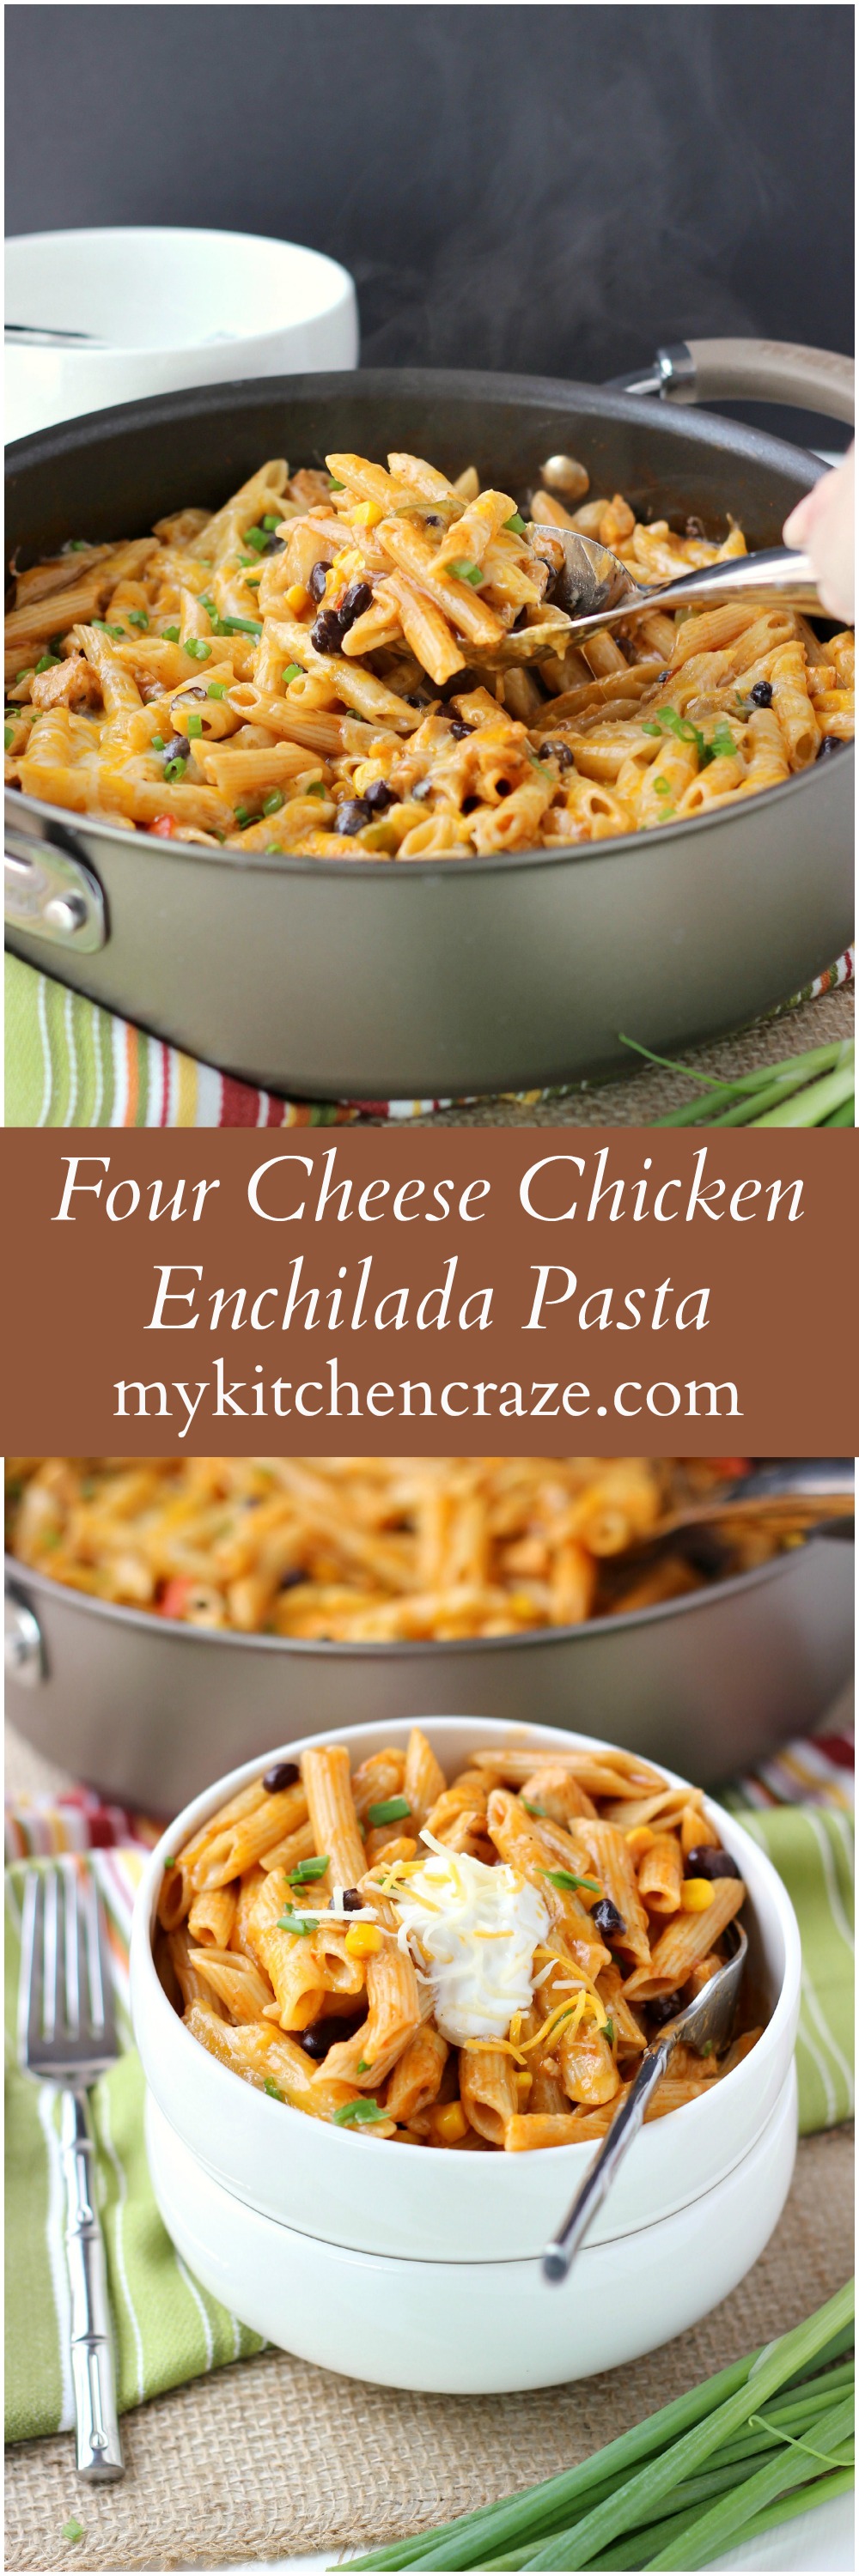 Ad #EverydayEffortless ~ Four Cheese Chicken Enchilada Pasta ~ www.mykitchencraze.com ~ Have an easy and delicious meal on your table within 10 minutes. Quick, easy and a family favorite!